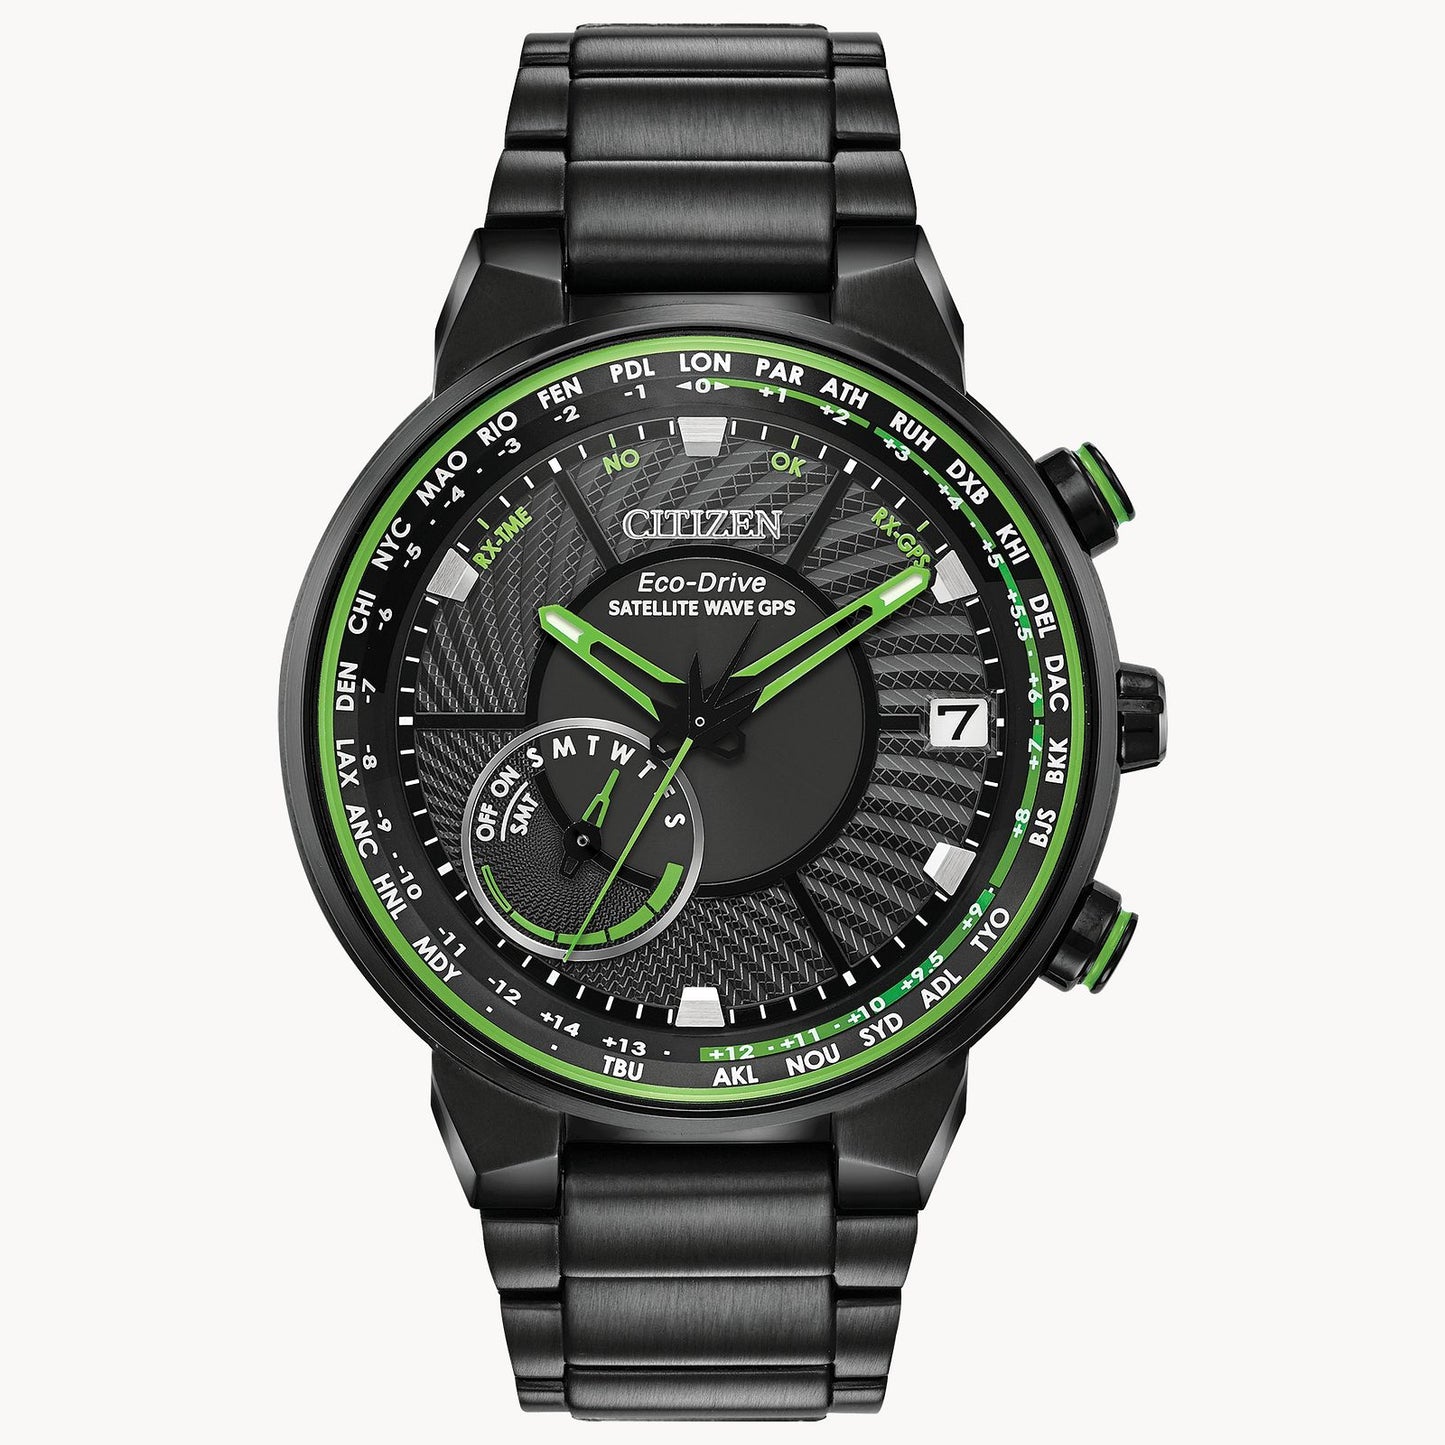 Load image into Gallery viewer, Satellite Wave GPS Freedom Citizen Watch CC3035-50E
